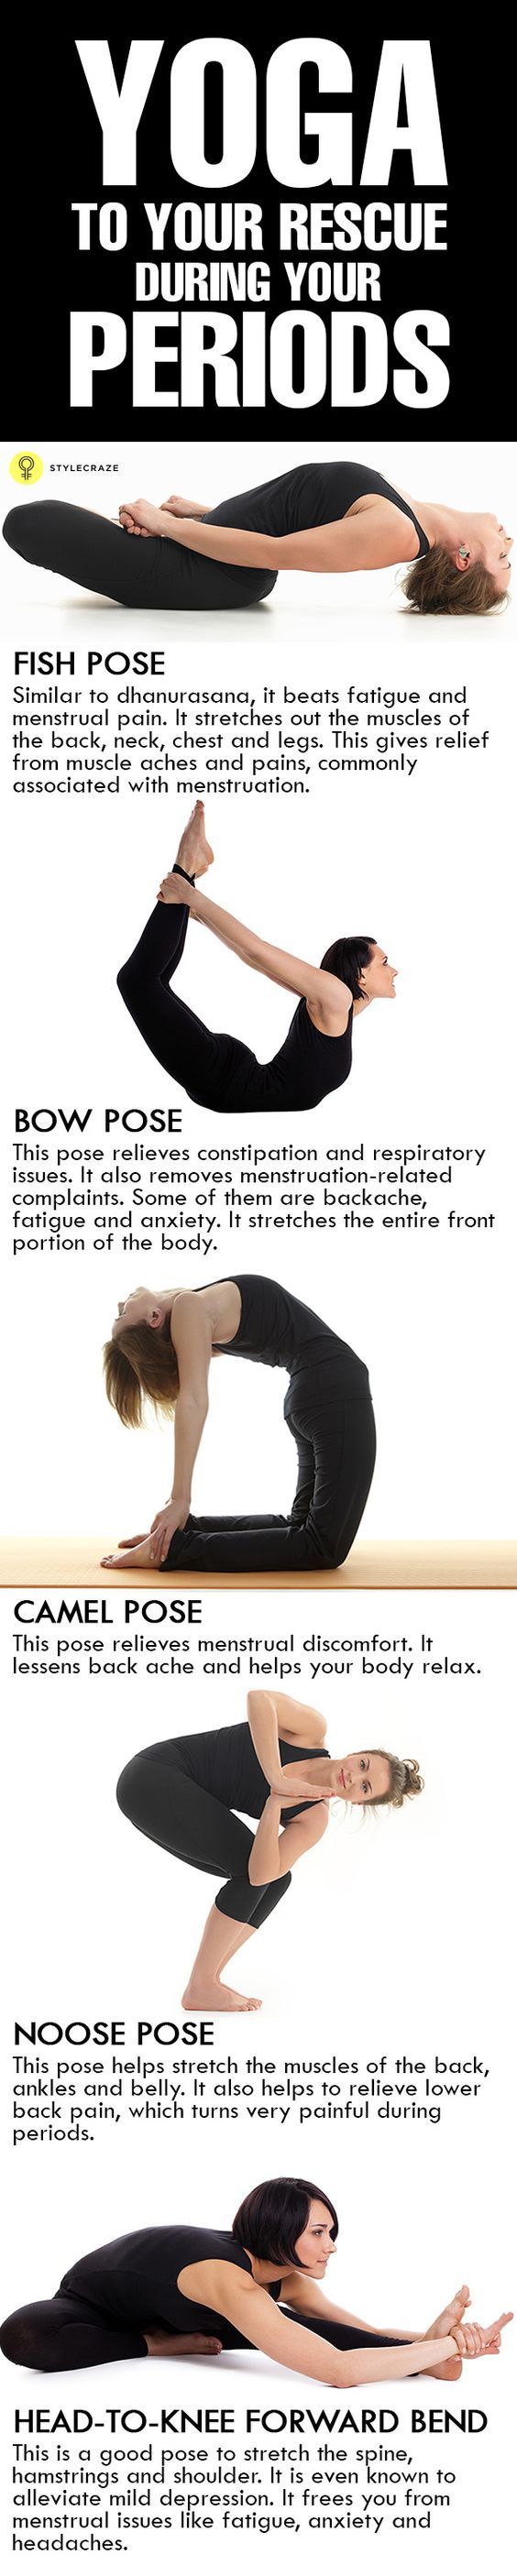 Read on to know more about the yoga poses, which will give you relief on those p...